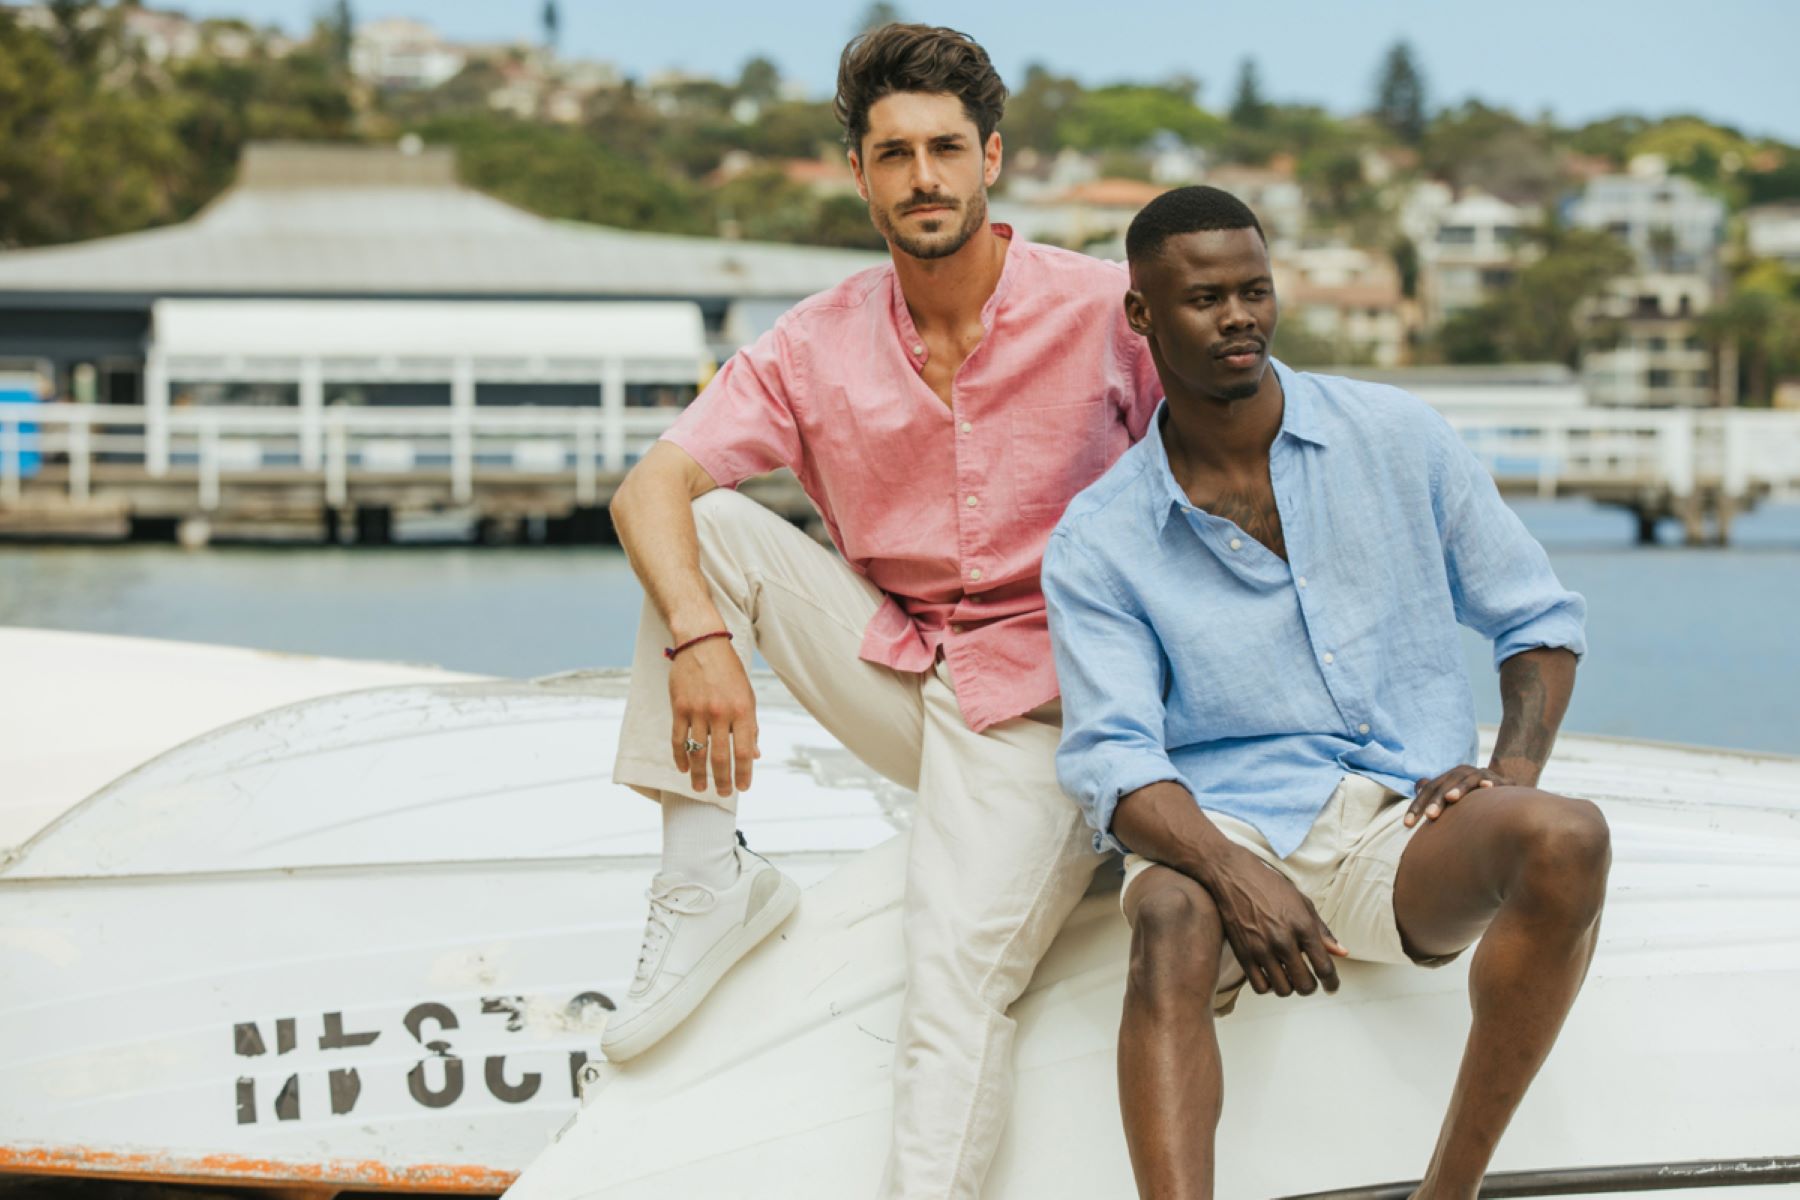 5 Stylish Ways To Rock Men's White Linen Pants For A Casual Summer Look